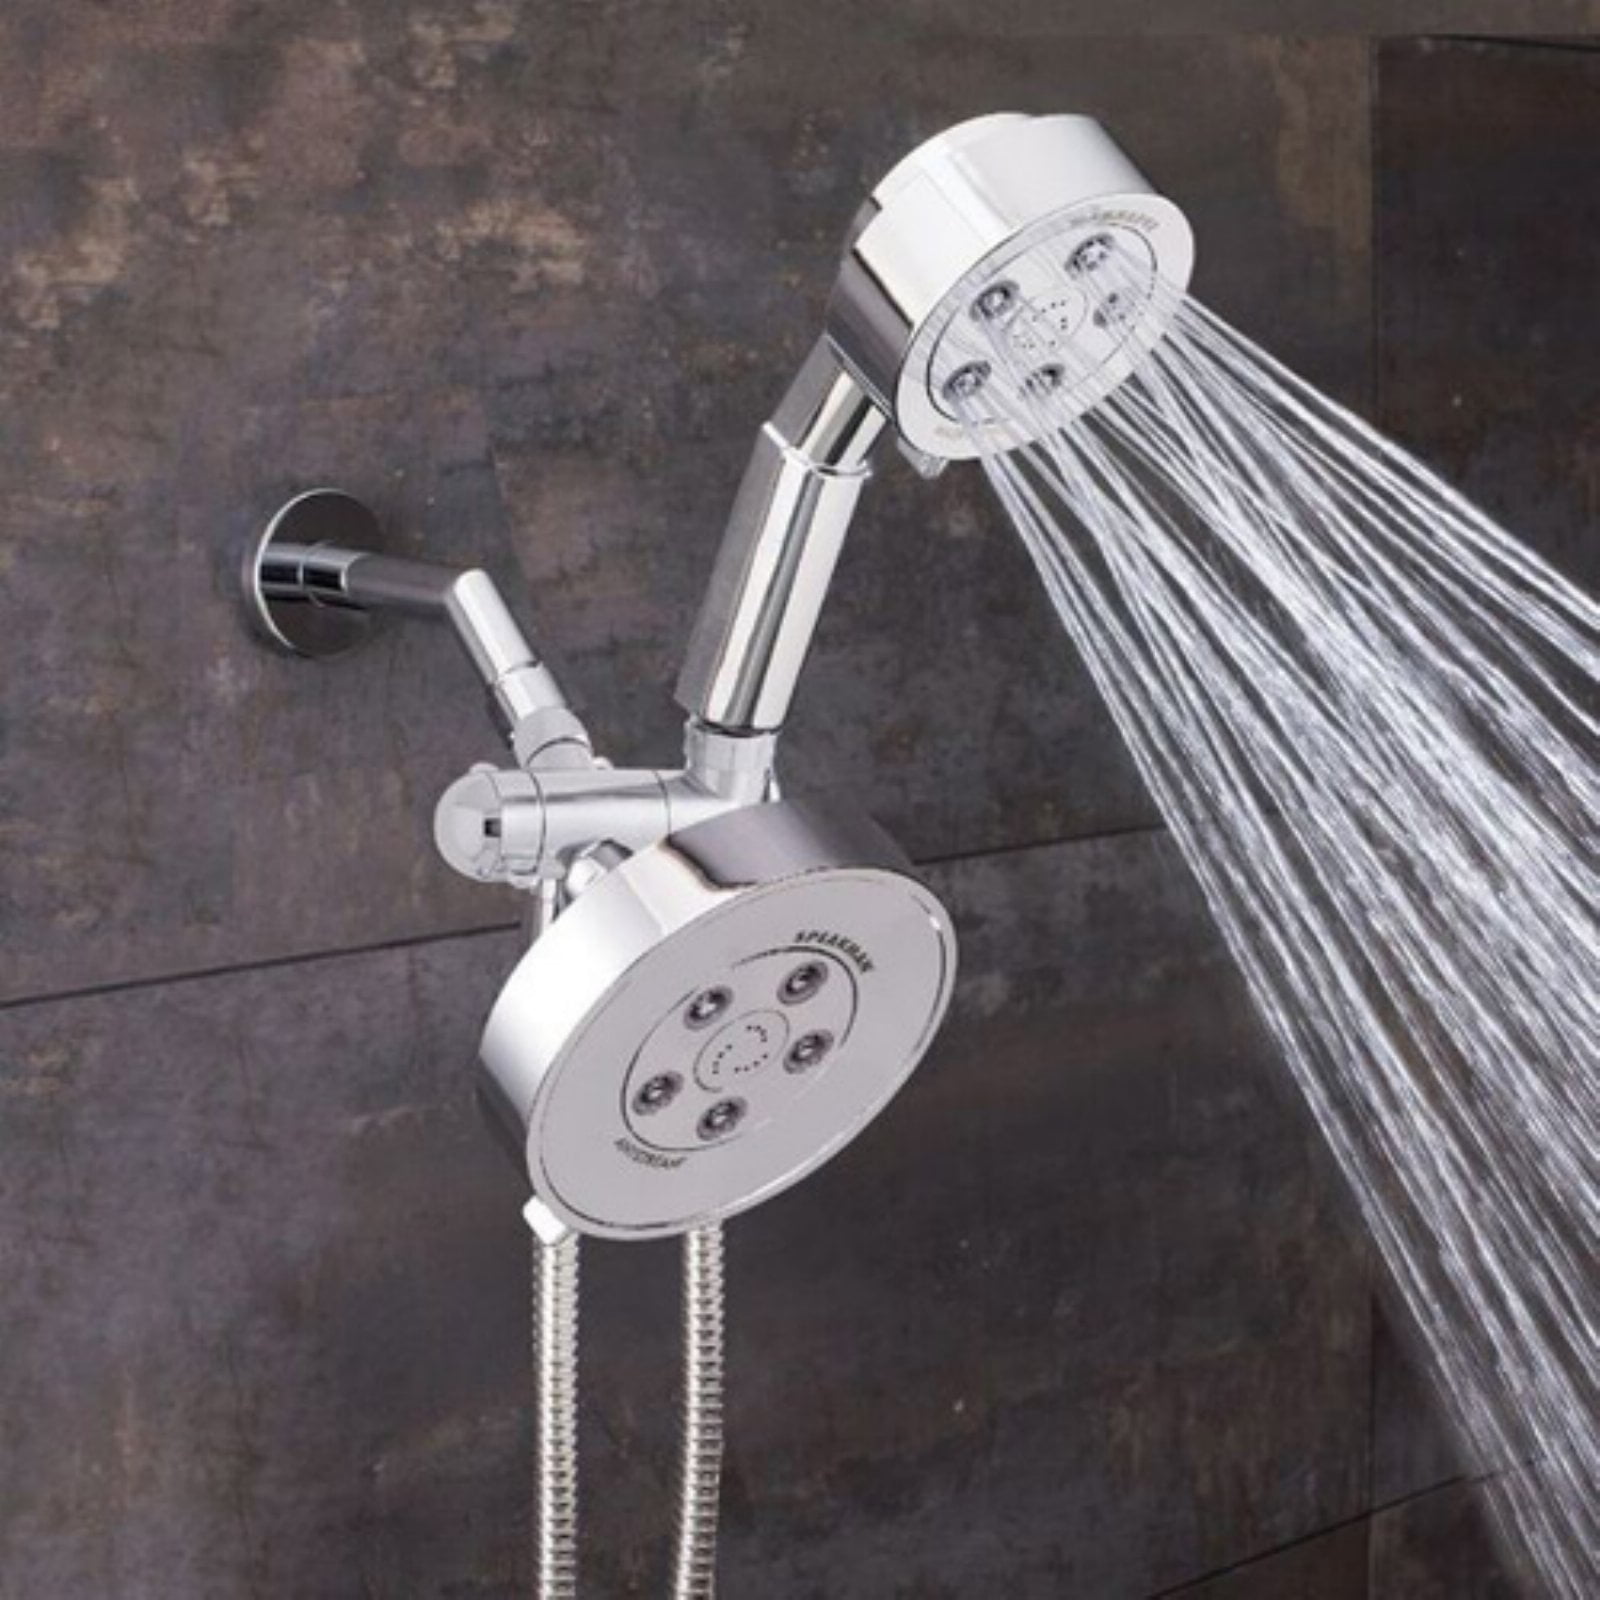 Speakman VS-3010 Neo Anystream High Pressure Handheld Shower Head with Hose 2.5 GPM Polished Chrome